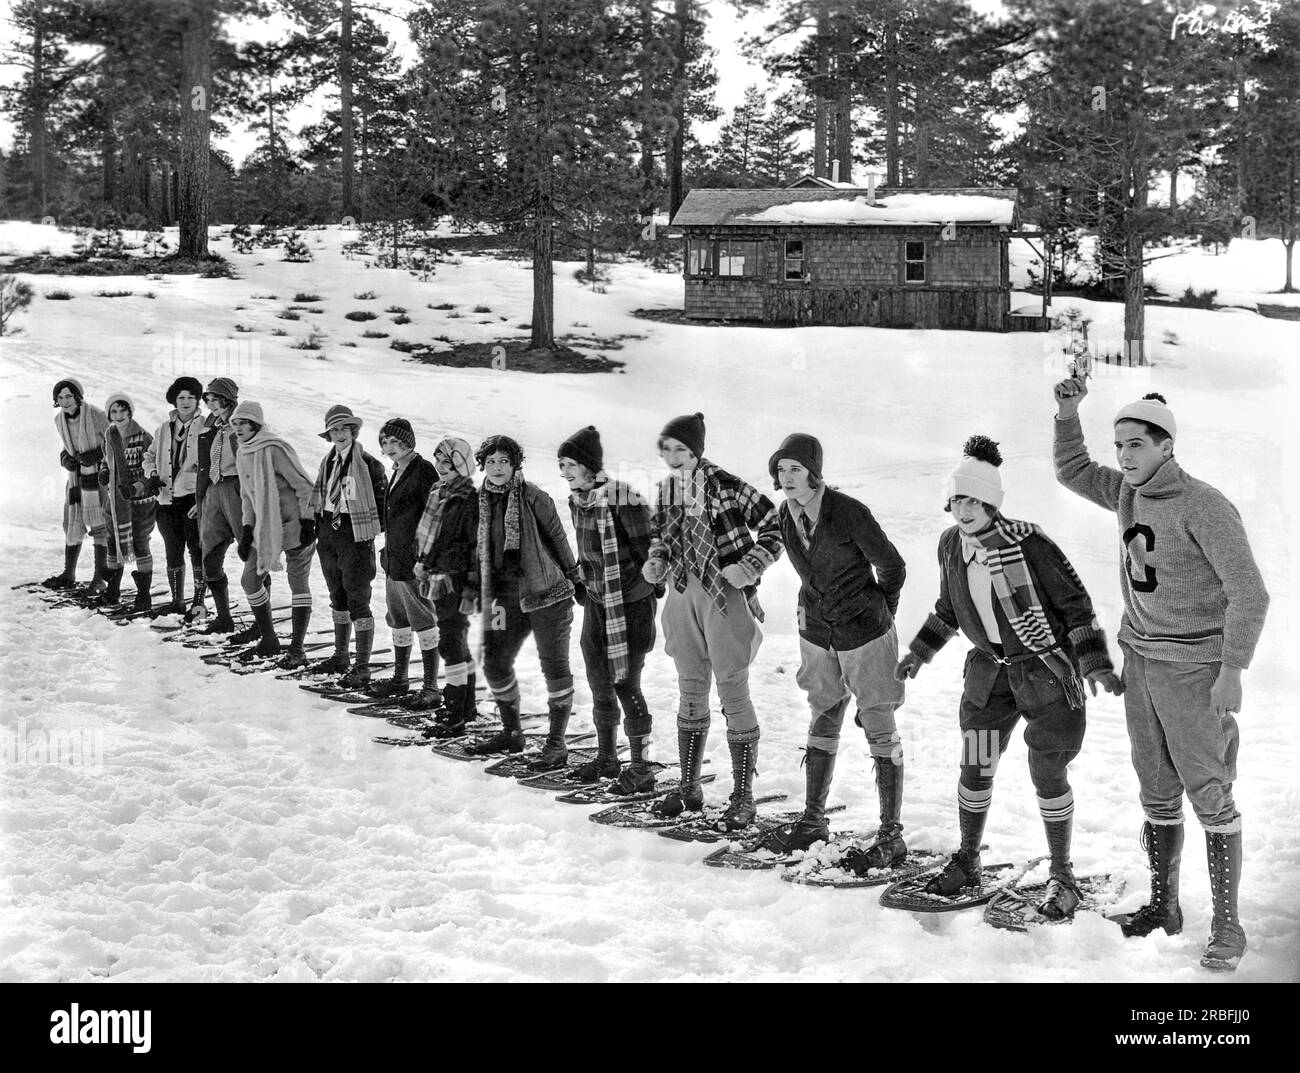 Big Bear, California:  1925. A scene from 'The Collegians' being filmed at Big Bear, California. George Lewis and Dorothy Gulliver are at the far right. Gulliver was the former 'Miss Salt Lake City'. Stock Photo